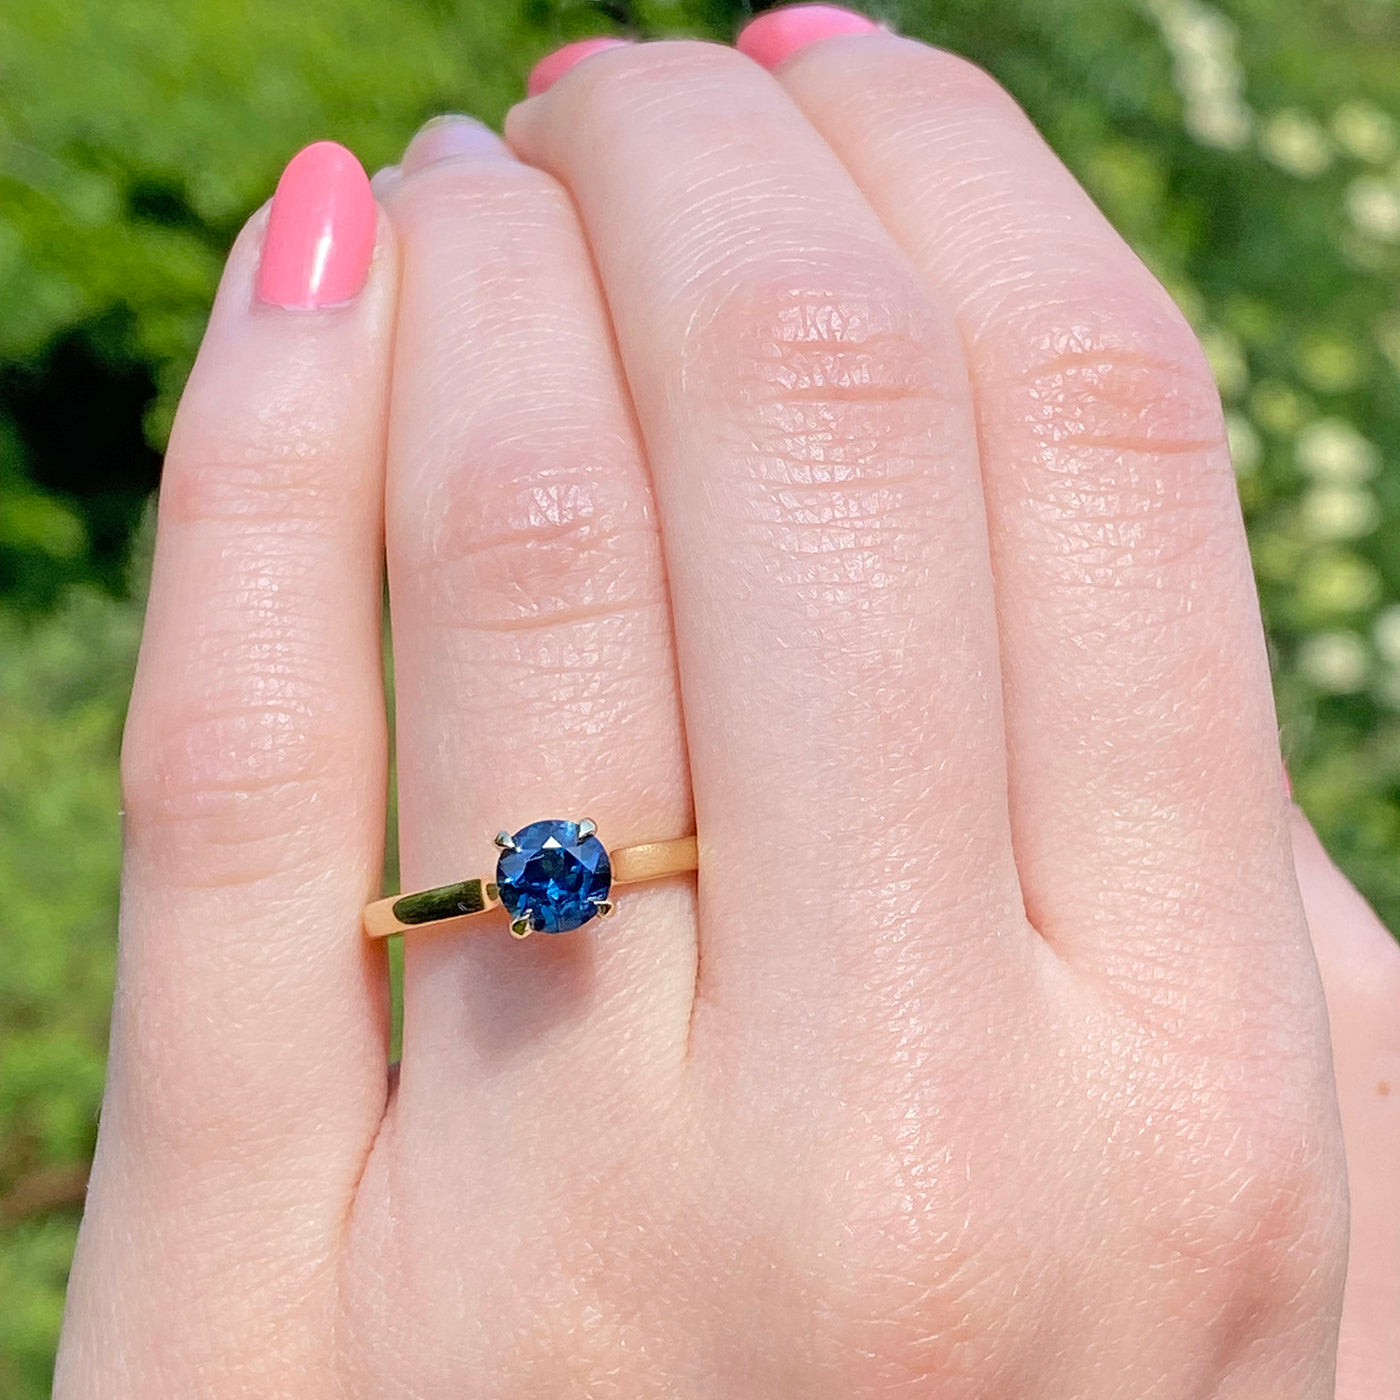 18ct Gold Deep Blue Sapphire Solitaire Ring (Size M, Resize J - P)